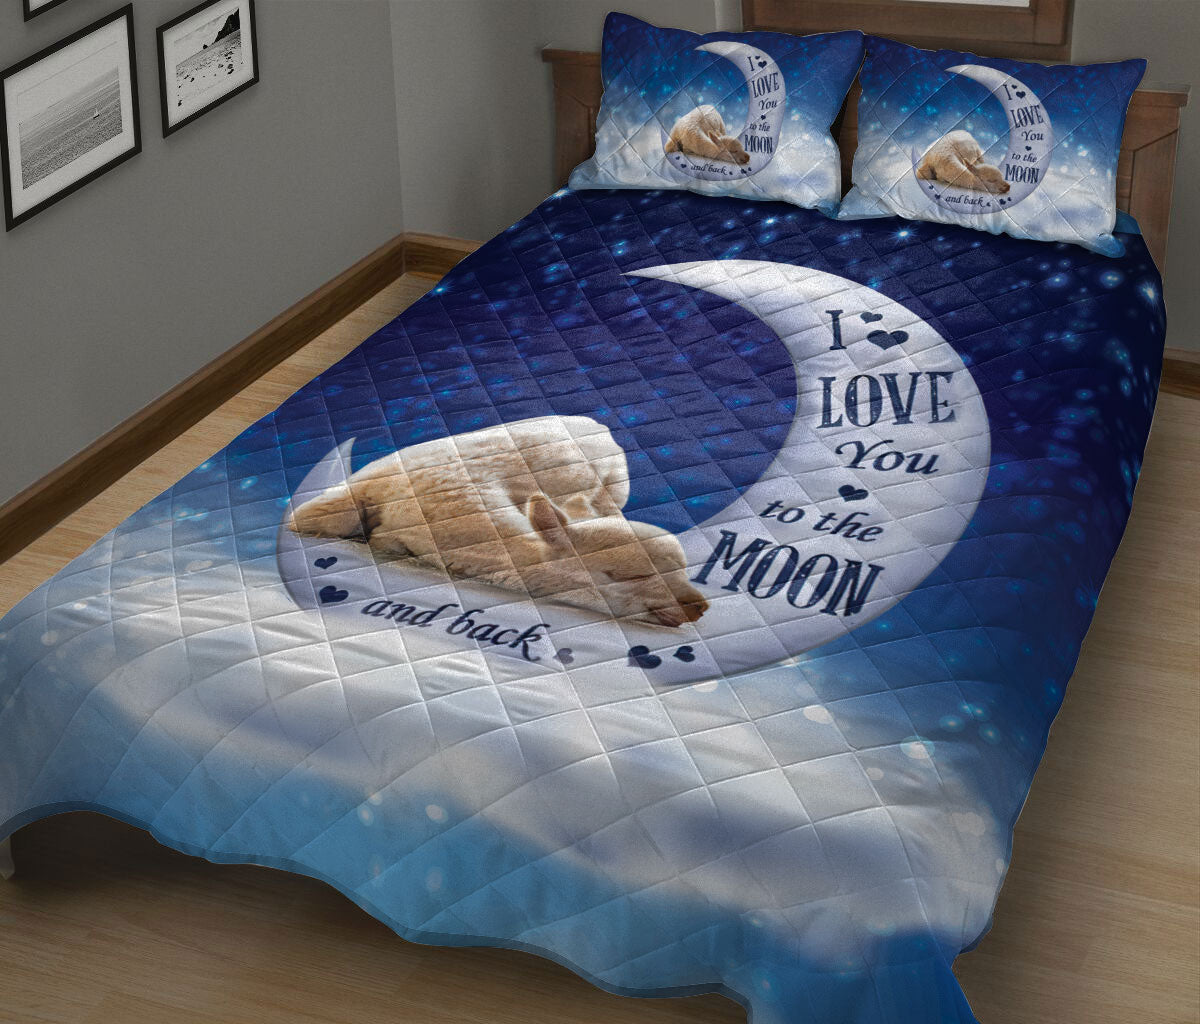 Ohaprints-Quilt-Bed-Set-Pillowcase-Sleeping-Alpaca-Llama-I-Love-You-To-The-Moon-And-Back-Gift-For-Animal-Lover-Blanket-Bedspread-Bedding-244-King (90'' x 100'')